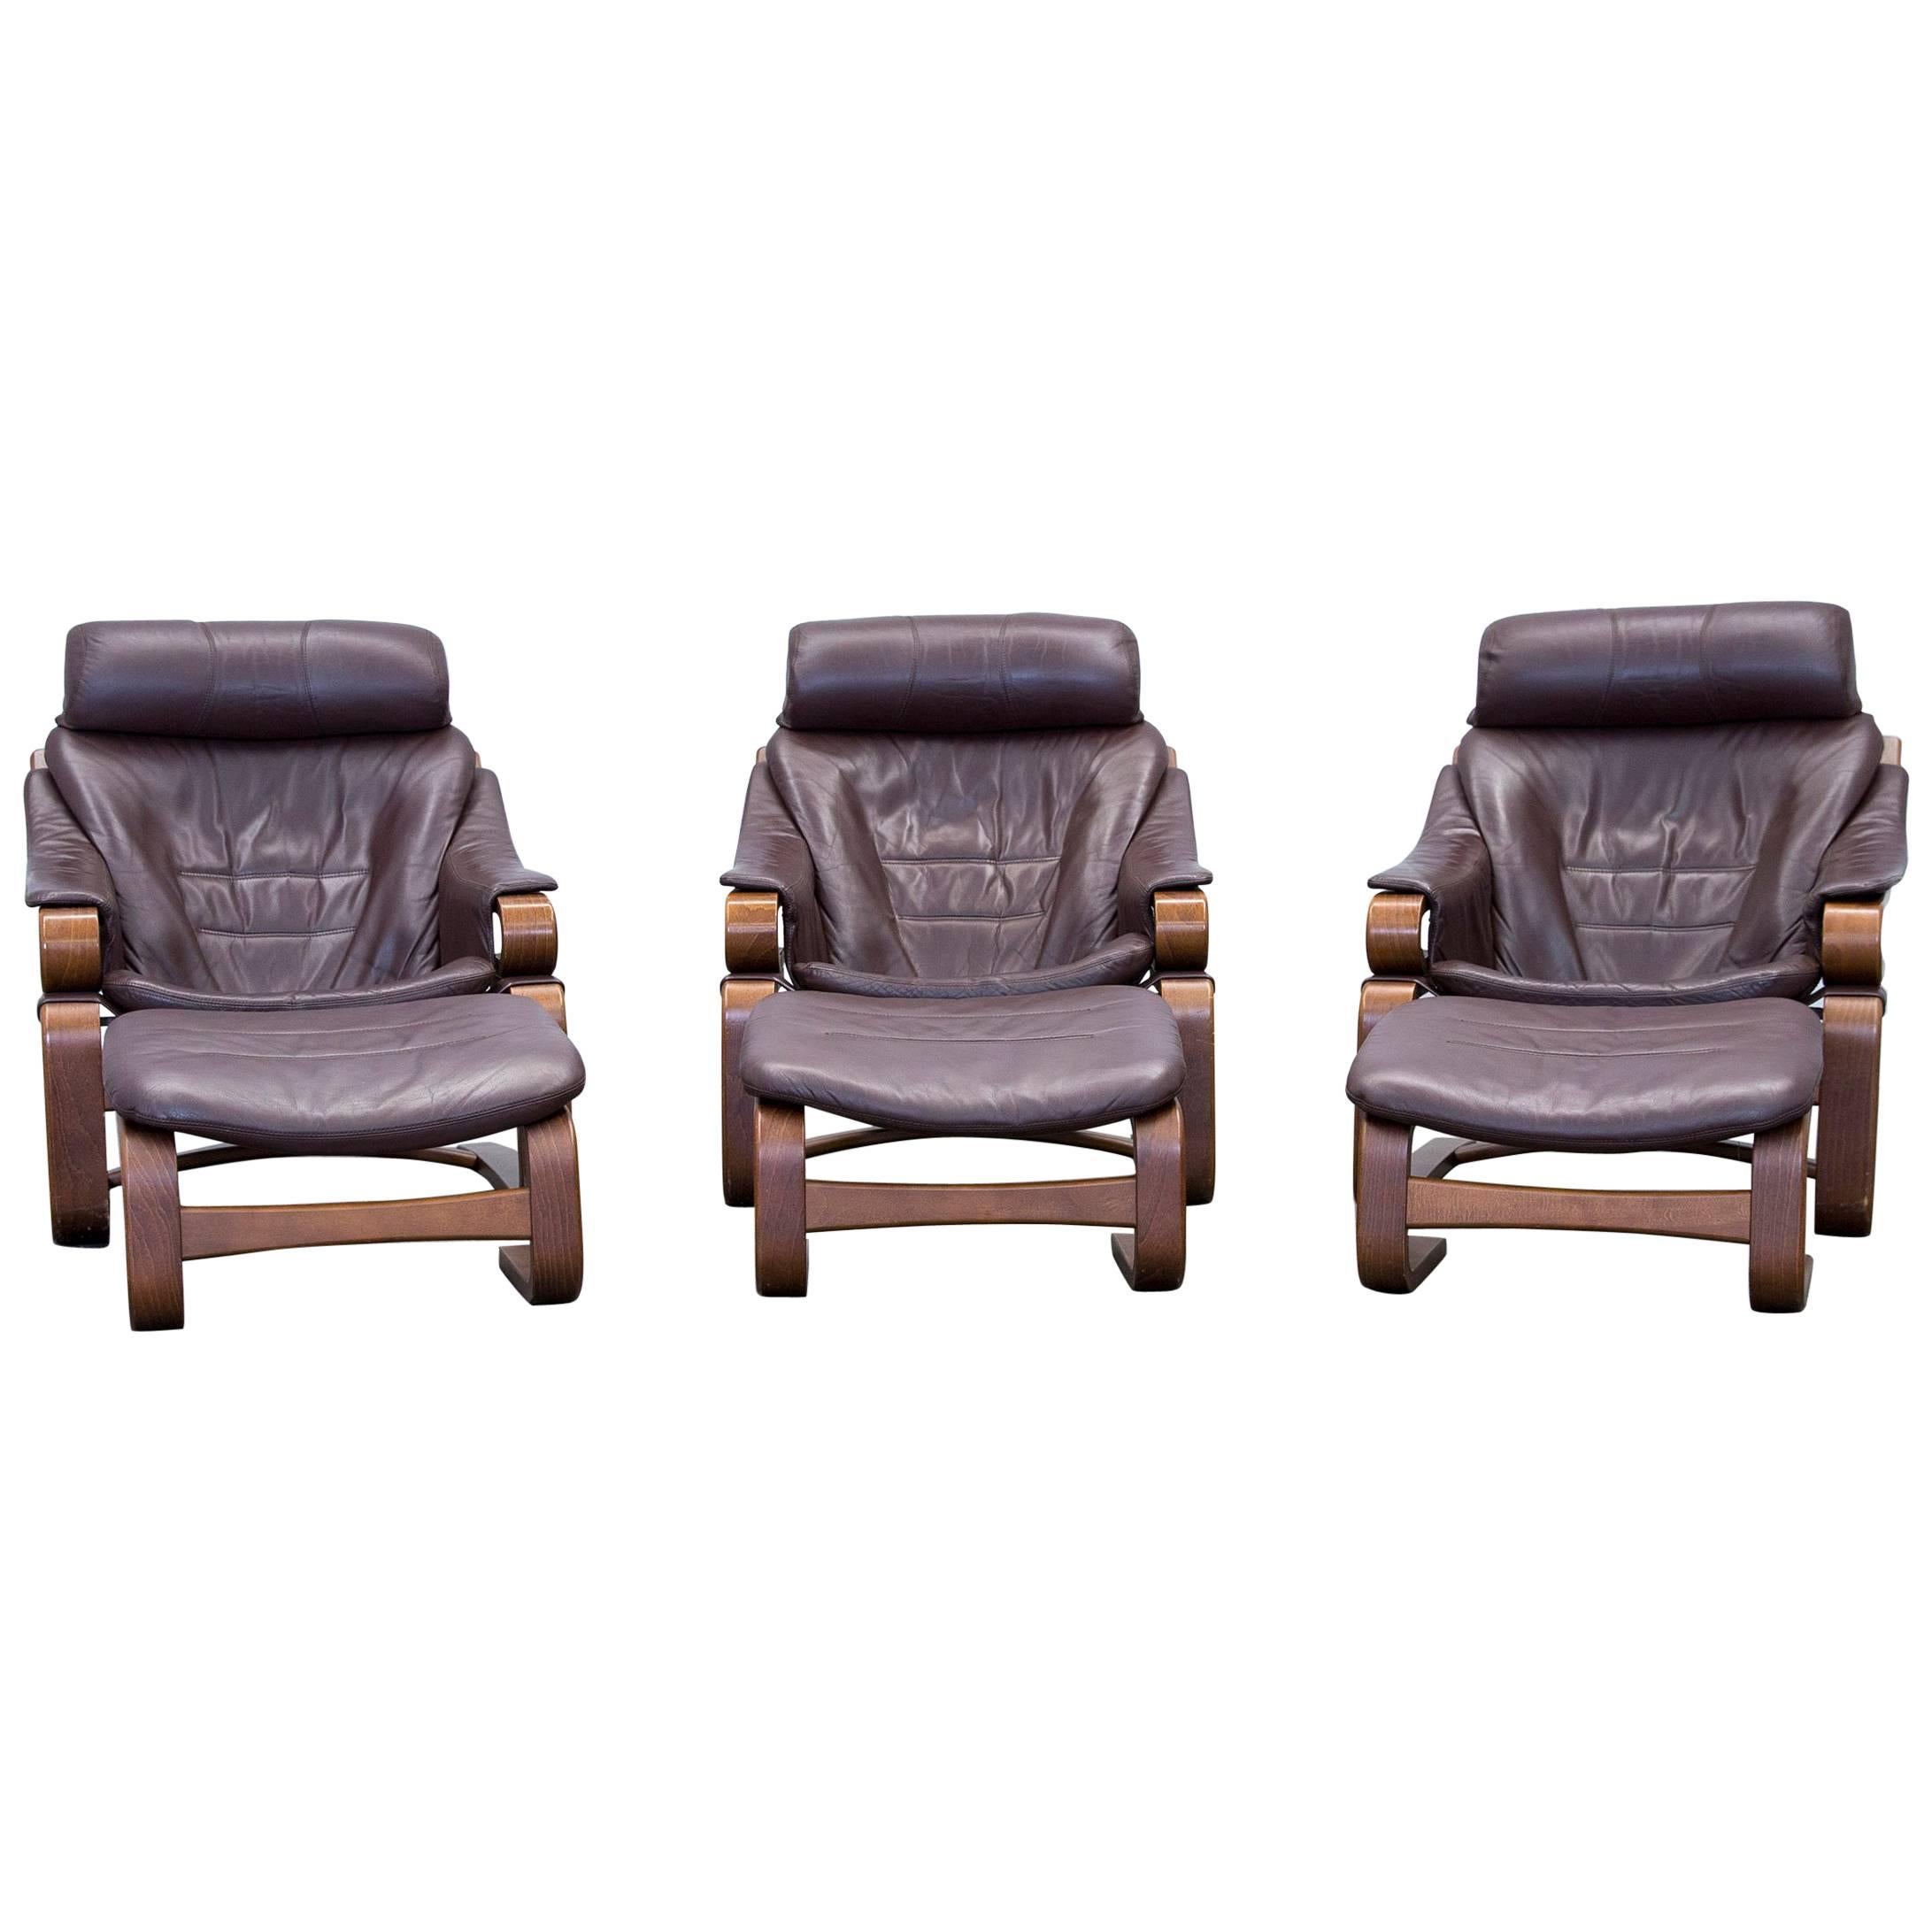 Skippers Furniture Designer Armchair Set Leather Brown One Seat Couch Modern